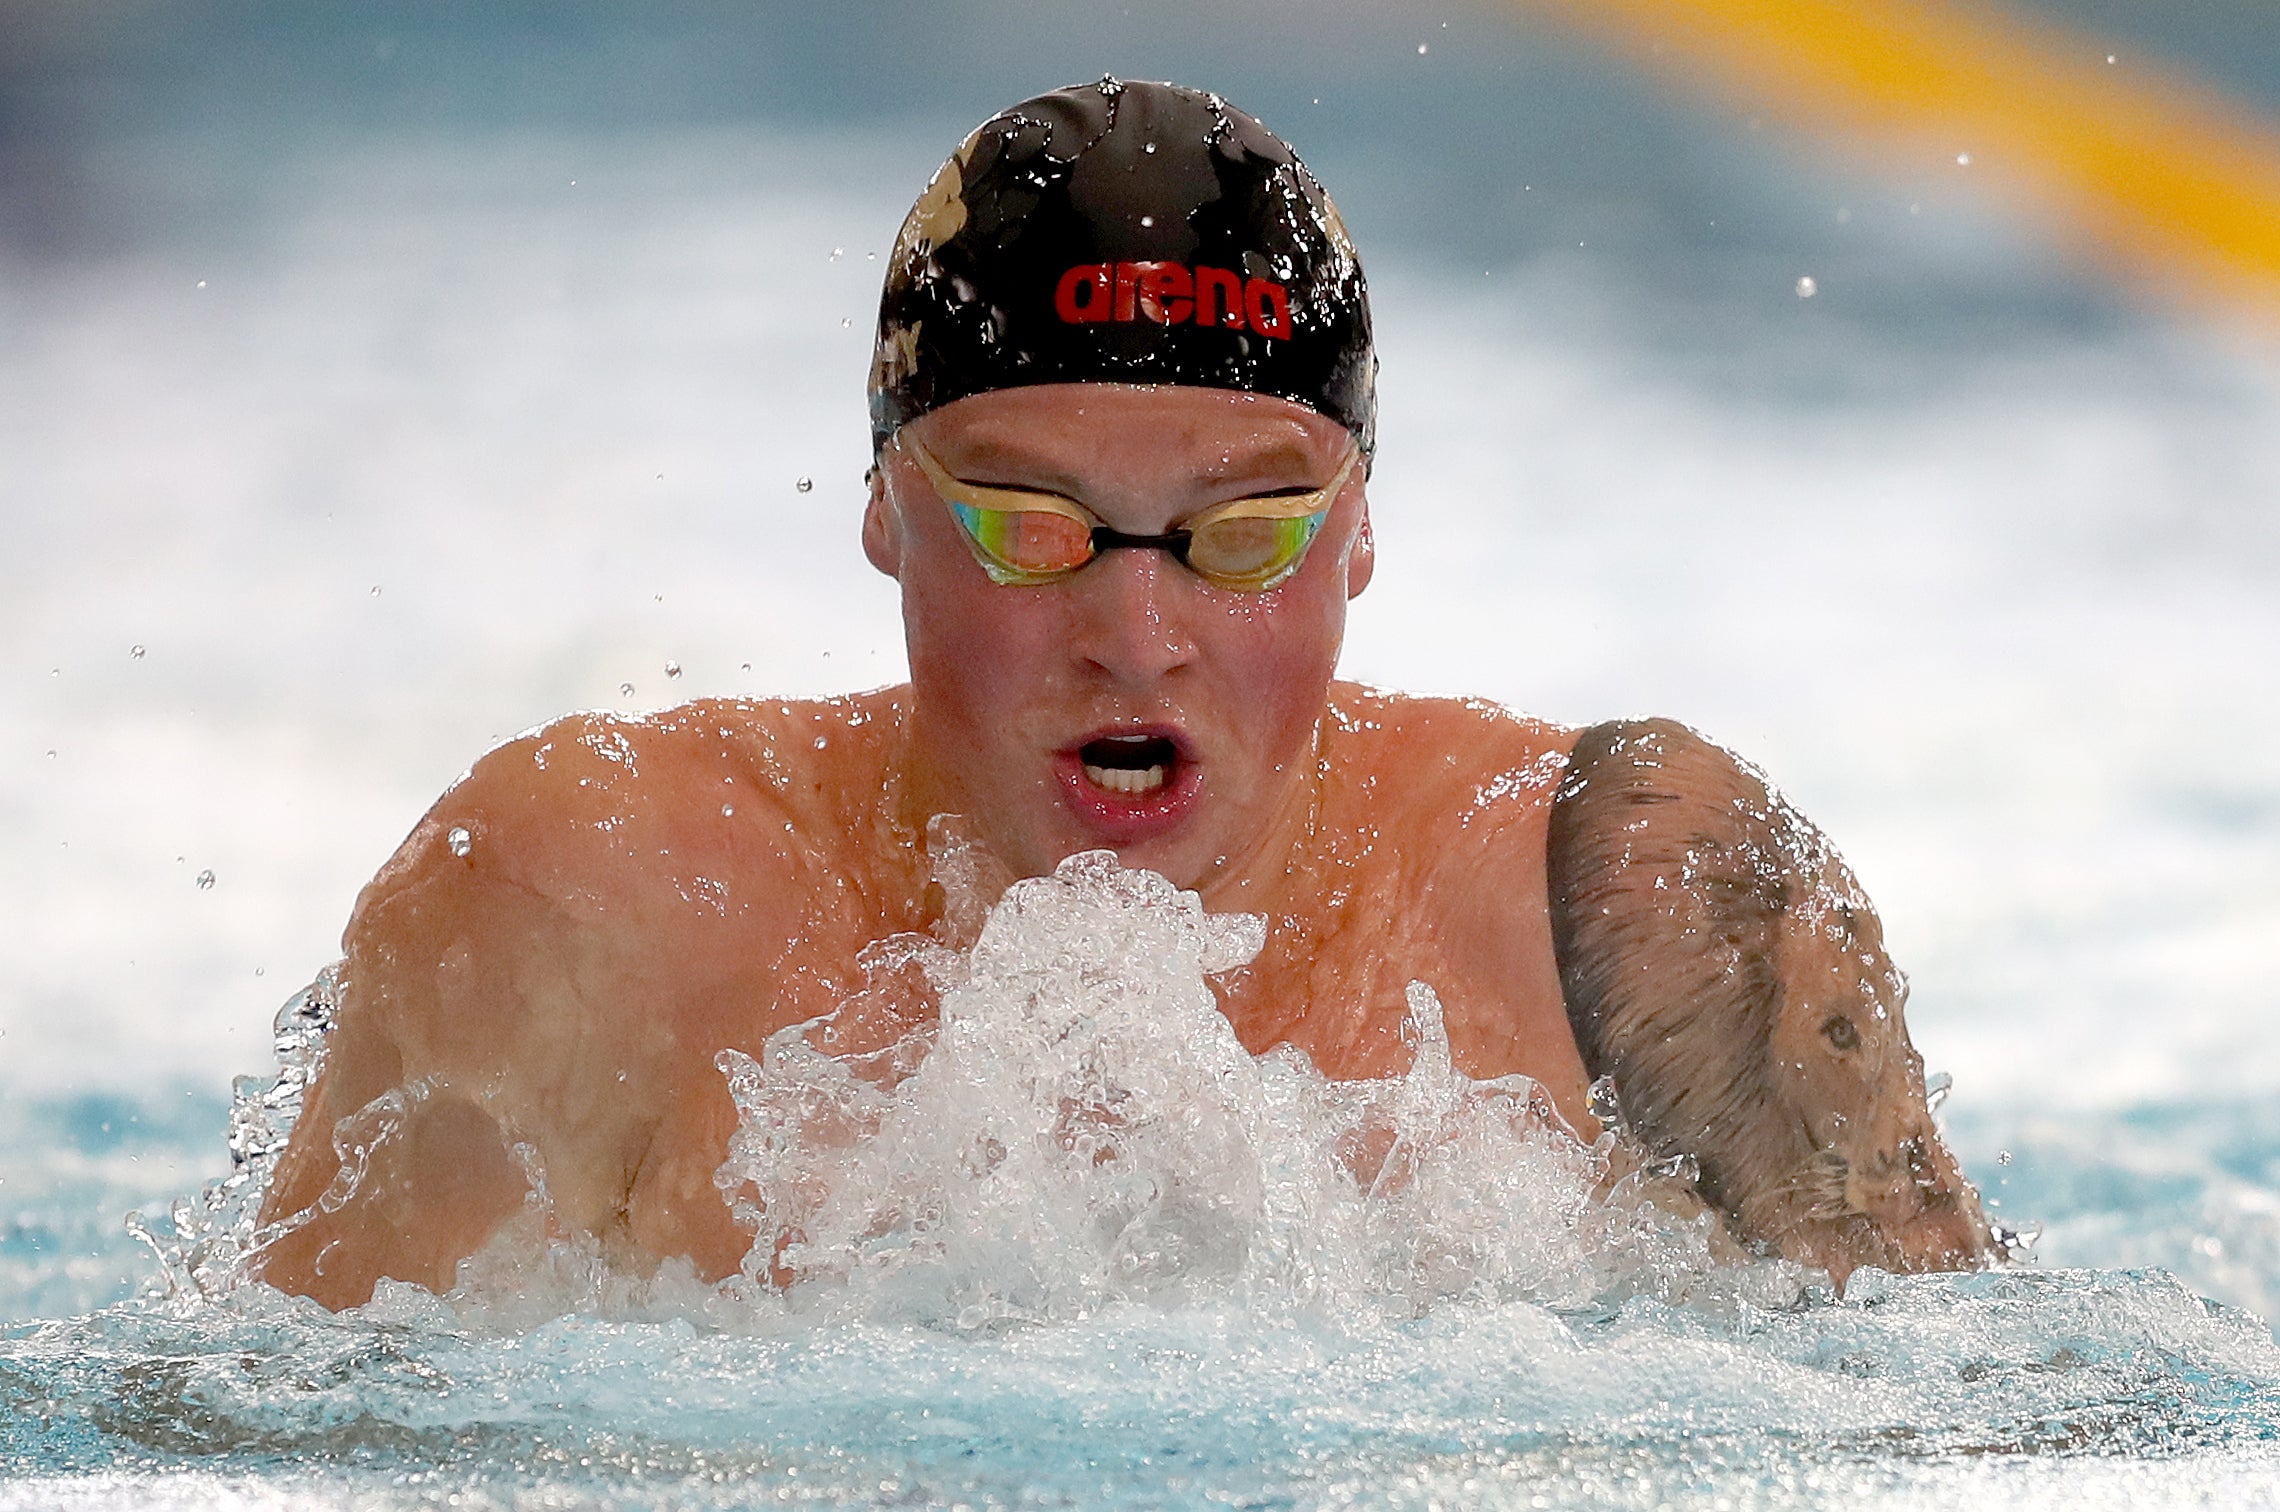 Adam Peaty will be counted on for 100m breaststroke gold in Tokyo (Jane Barlow/PA)